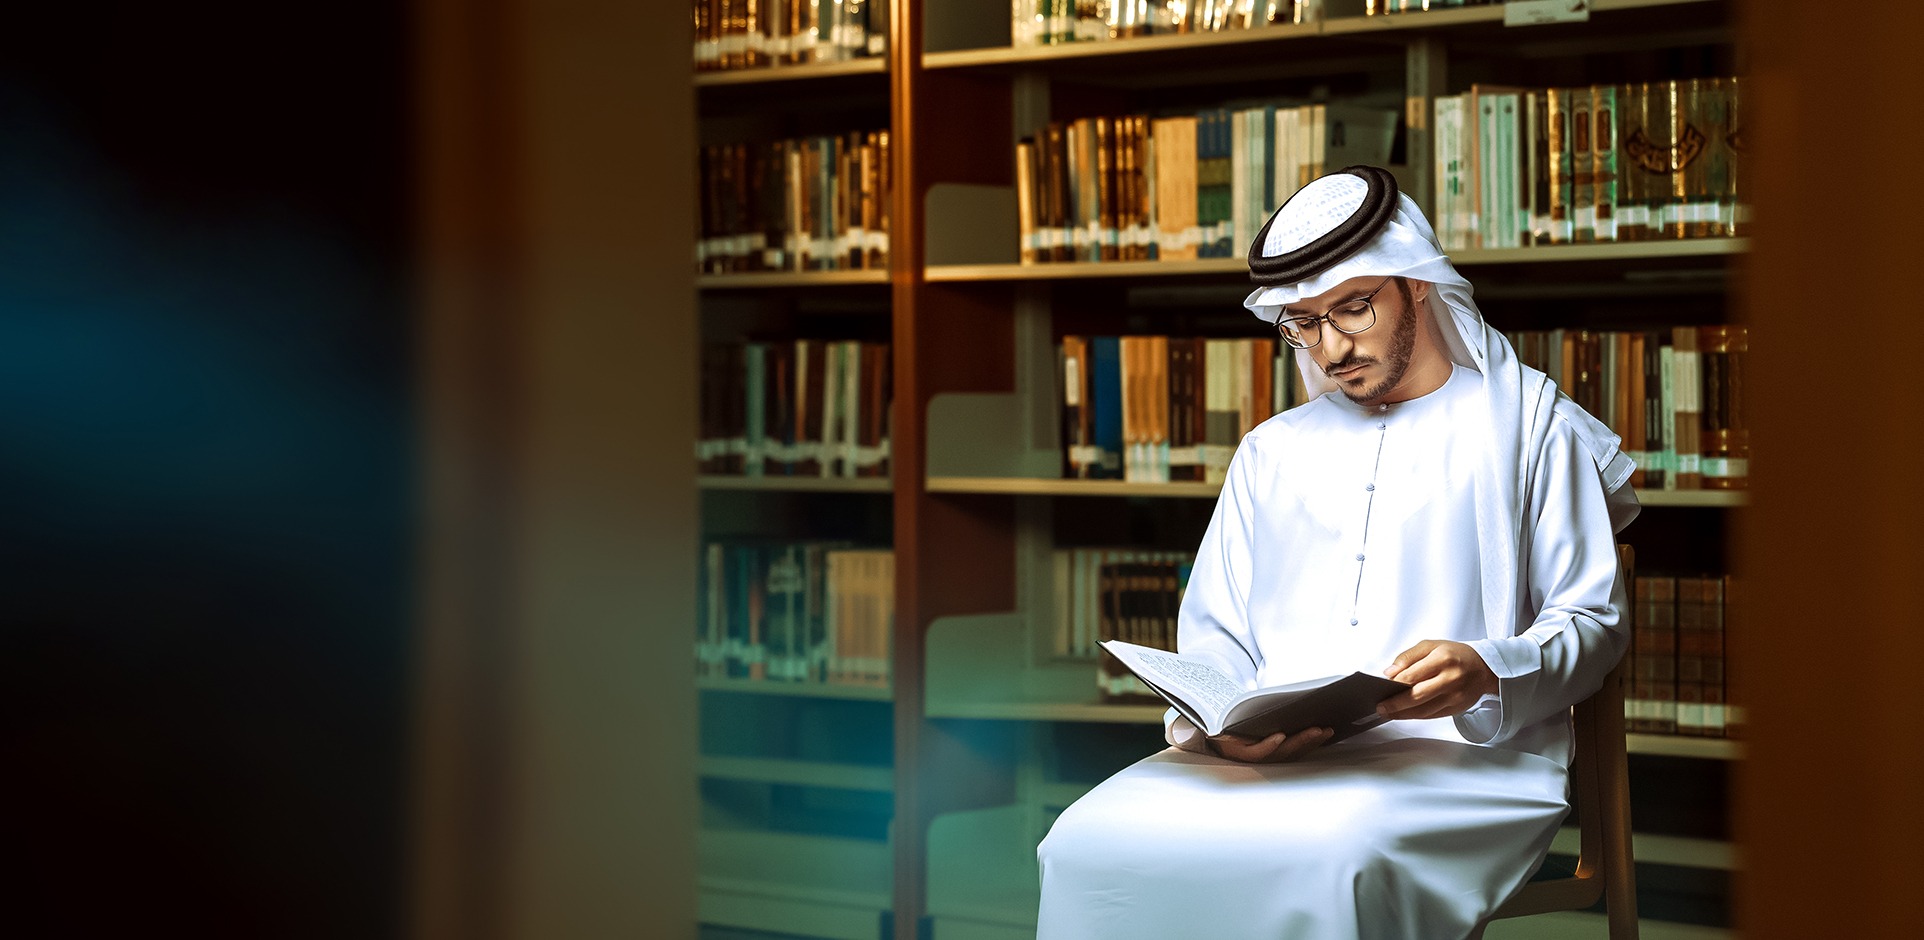 Welcome To Mohamed Bin Zayed University For Humanities